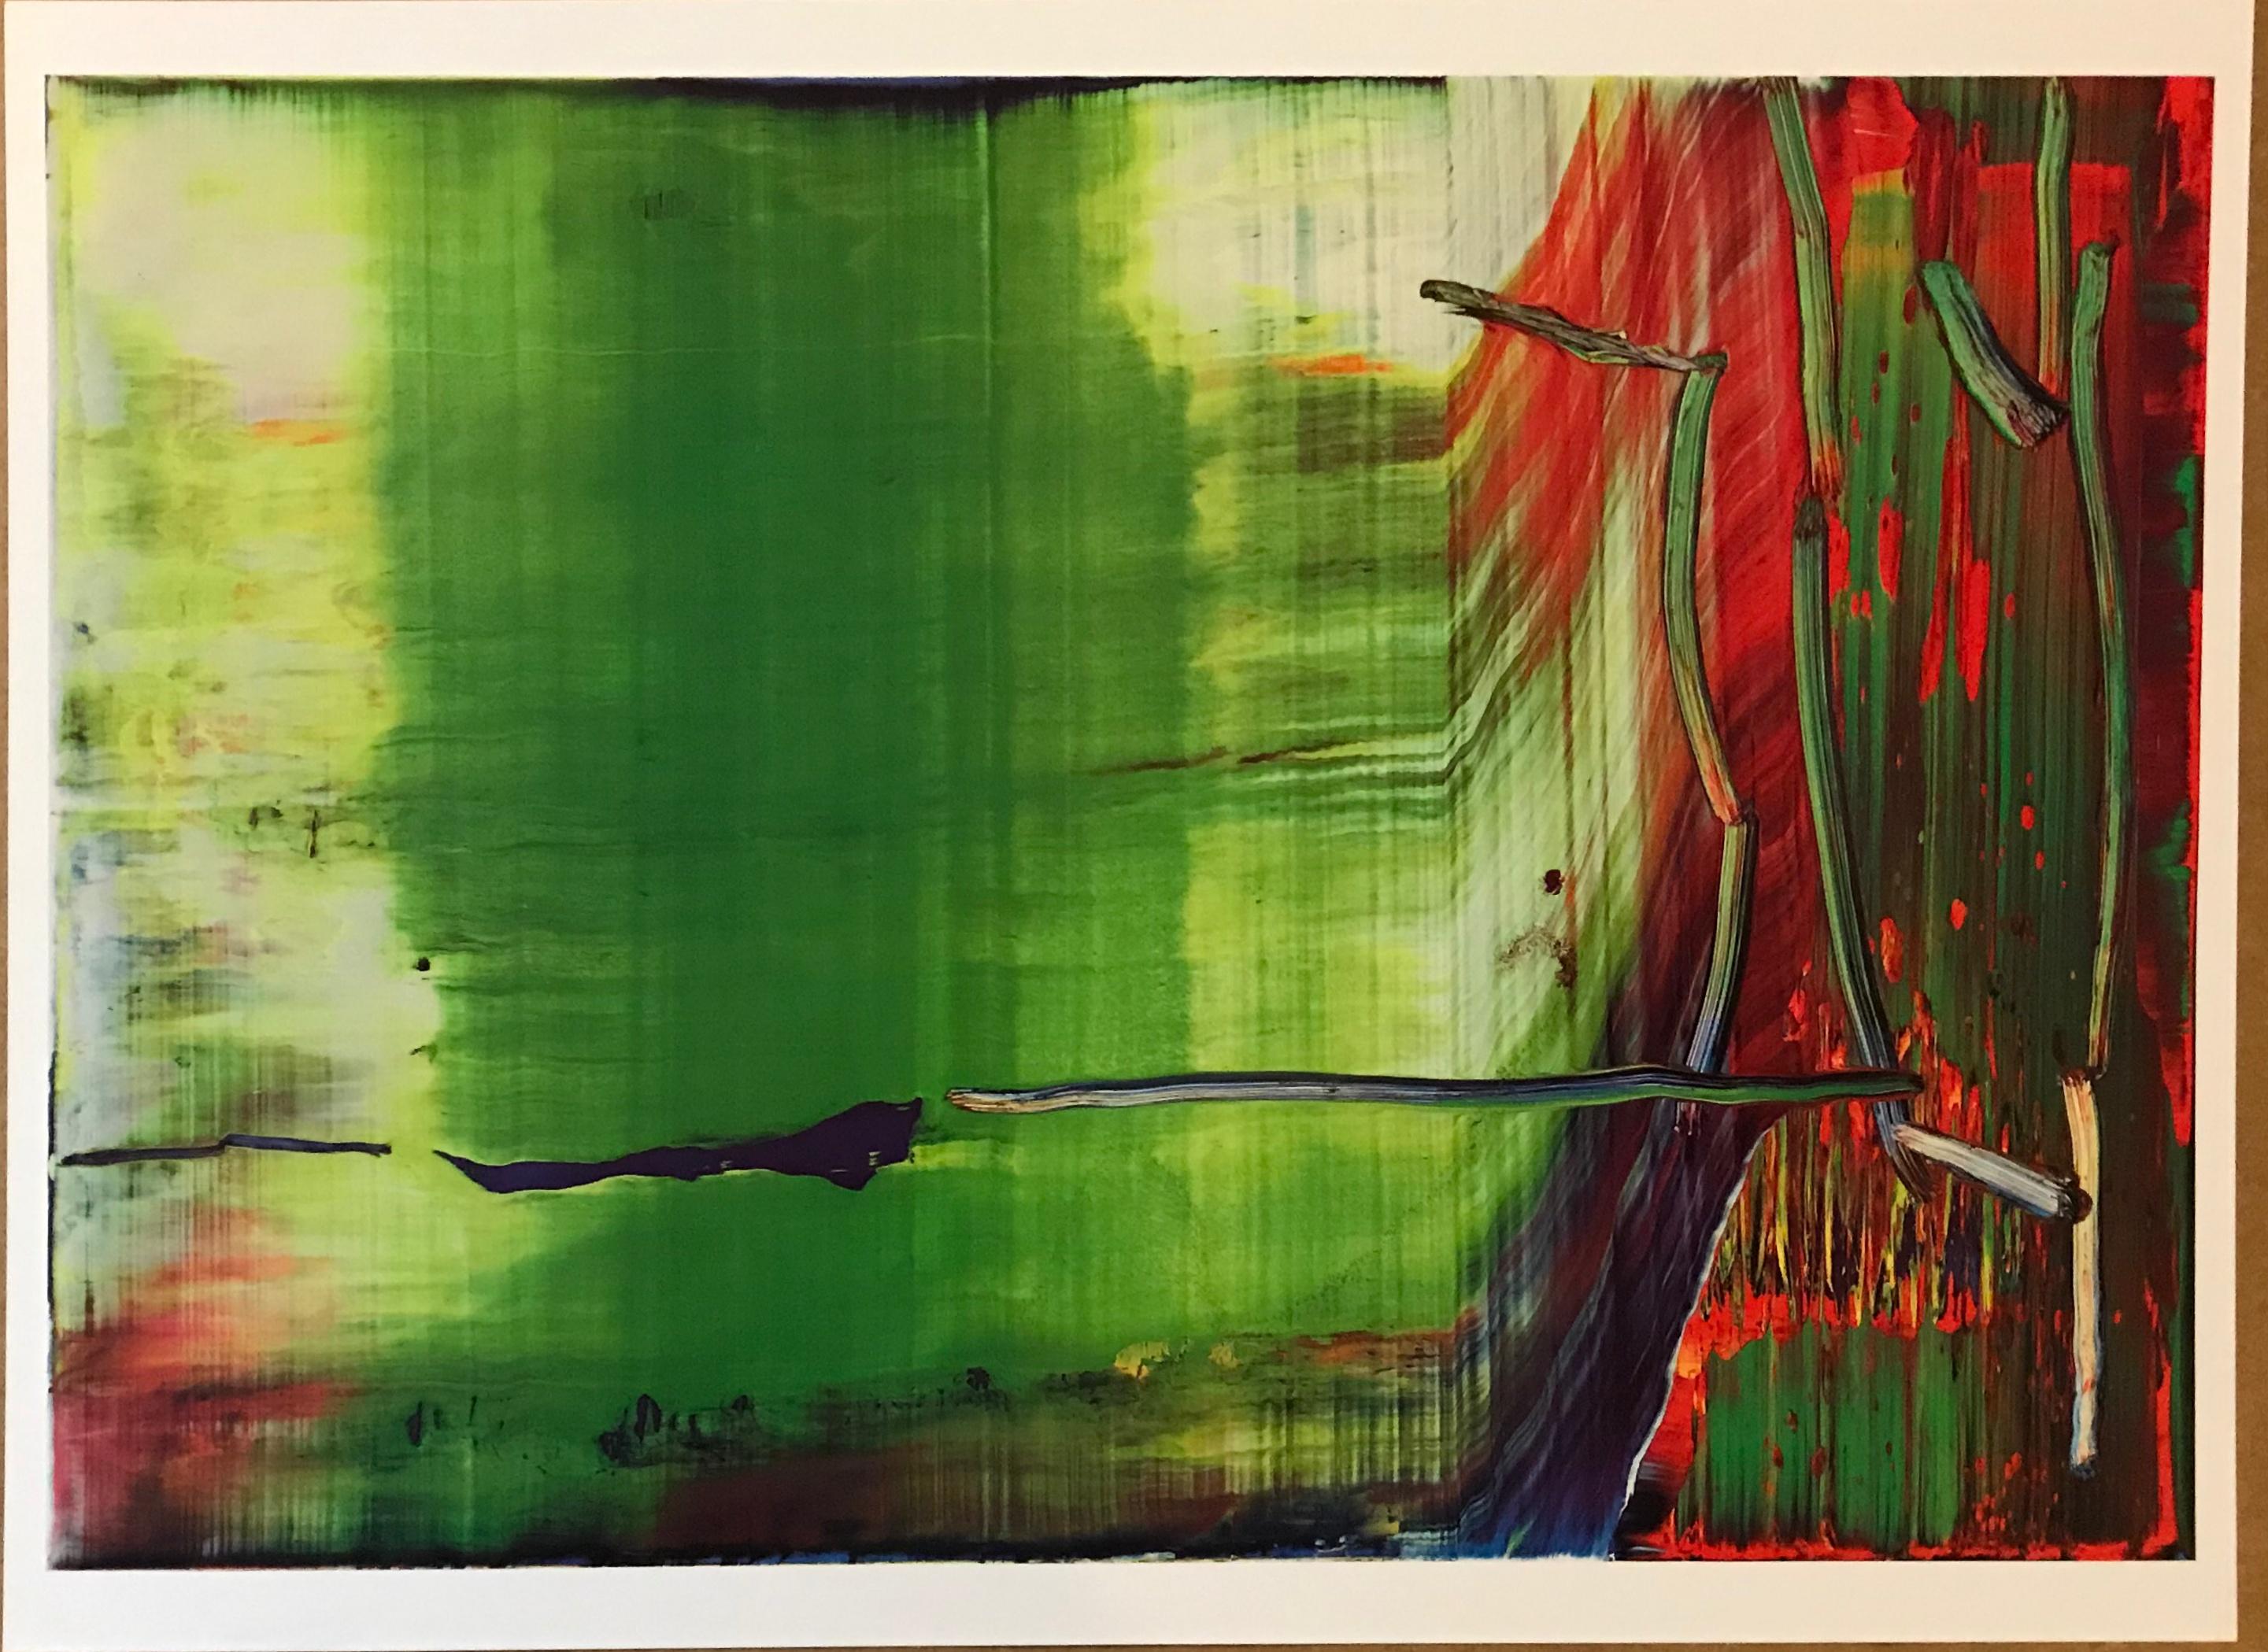 Untitled Abstract Picture (Limited edition authorized promotional reproduction) - Print by Gerhard Richter